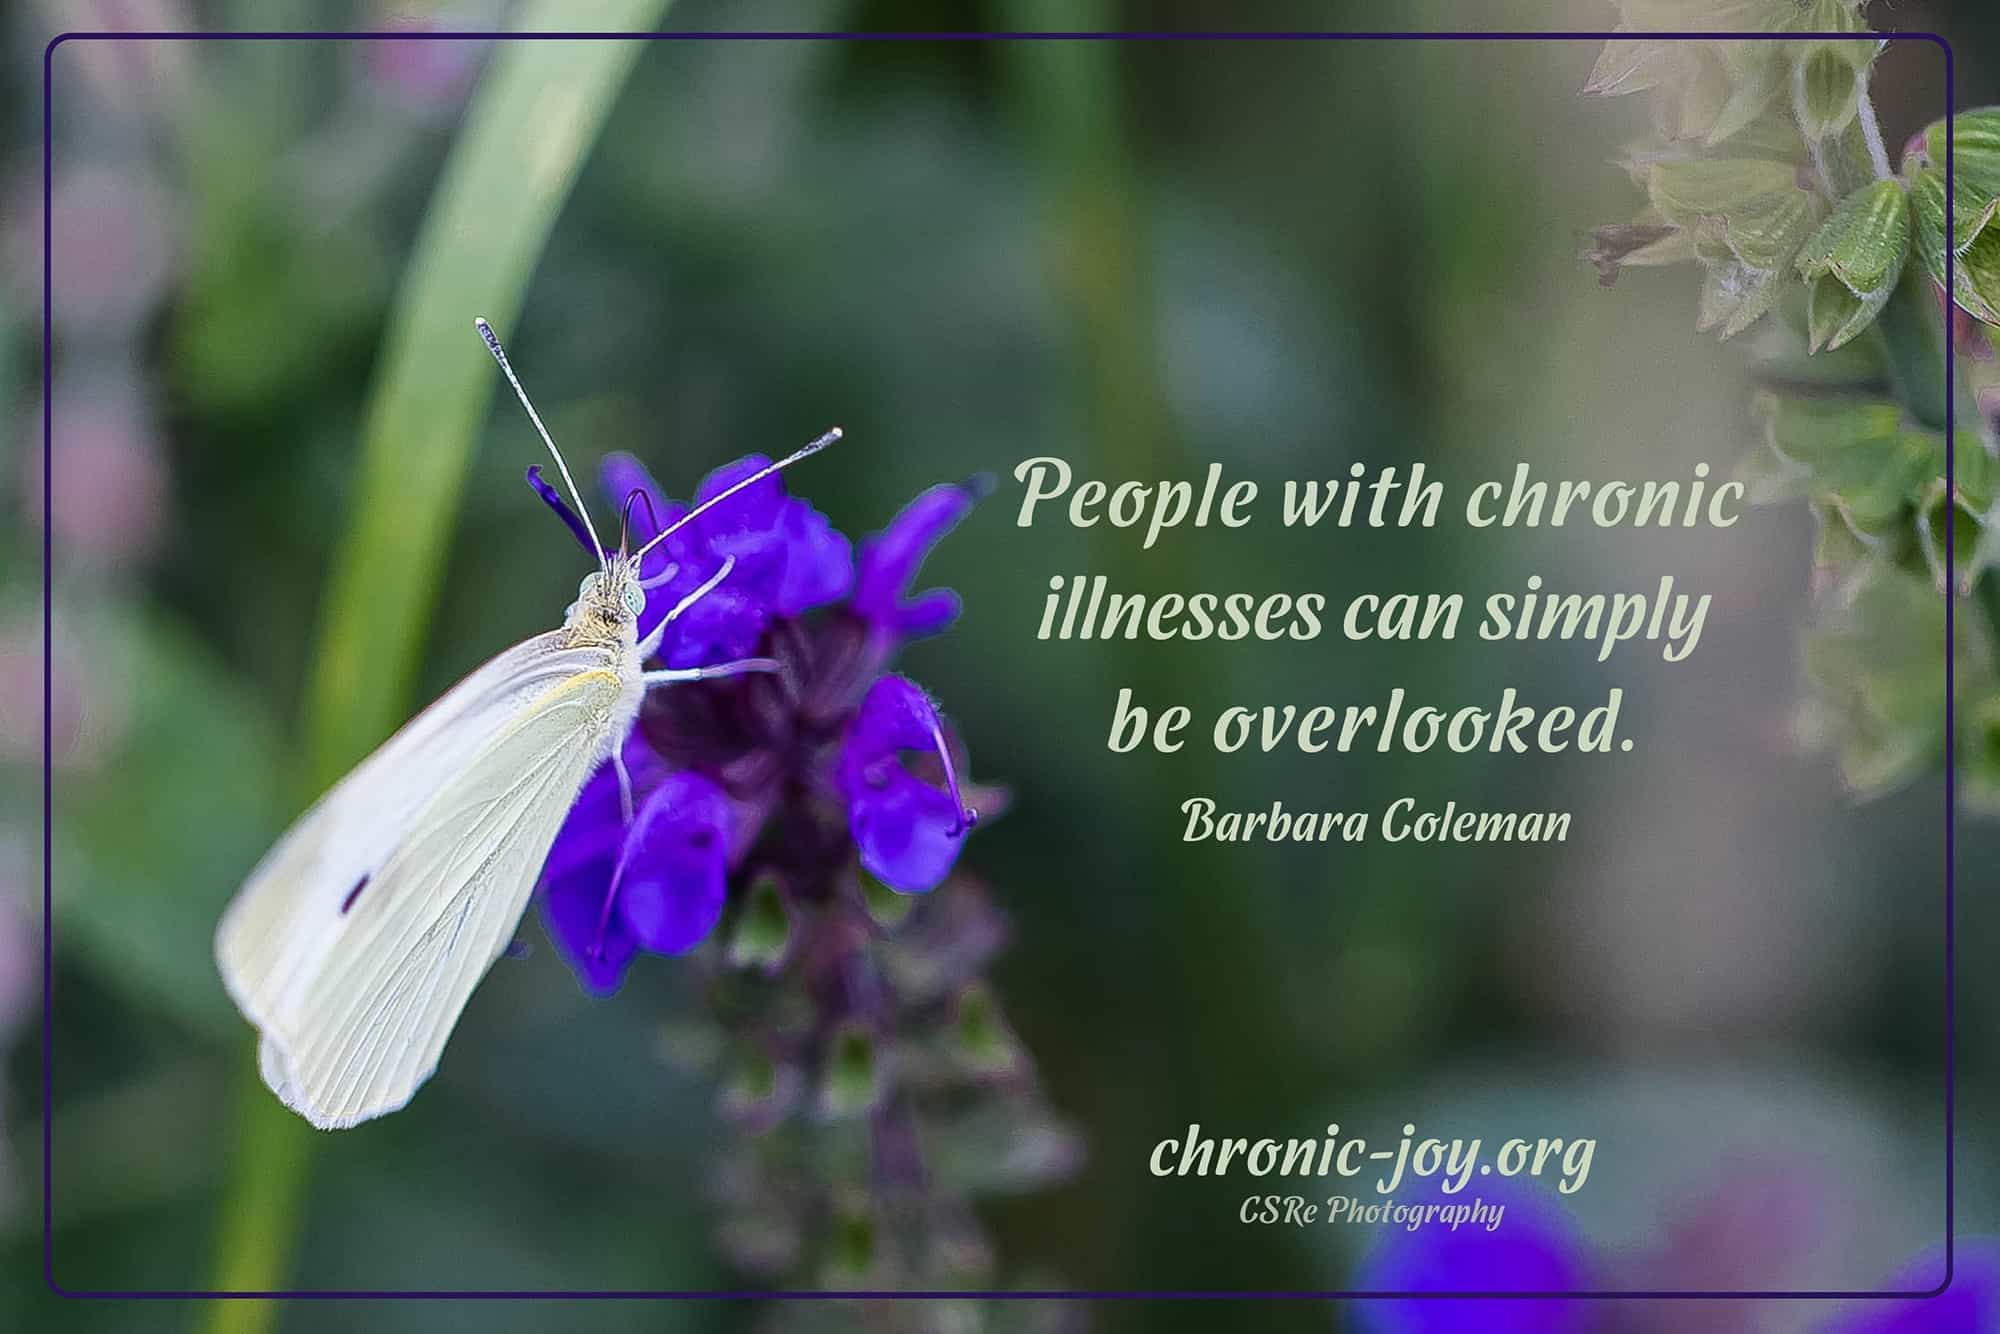 People with chronic illnesses can simply be overlooked.